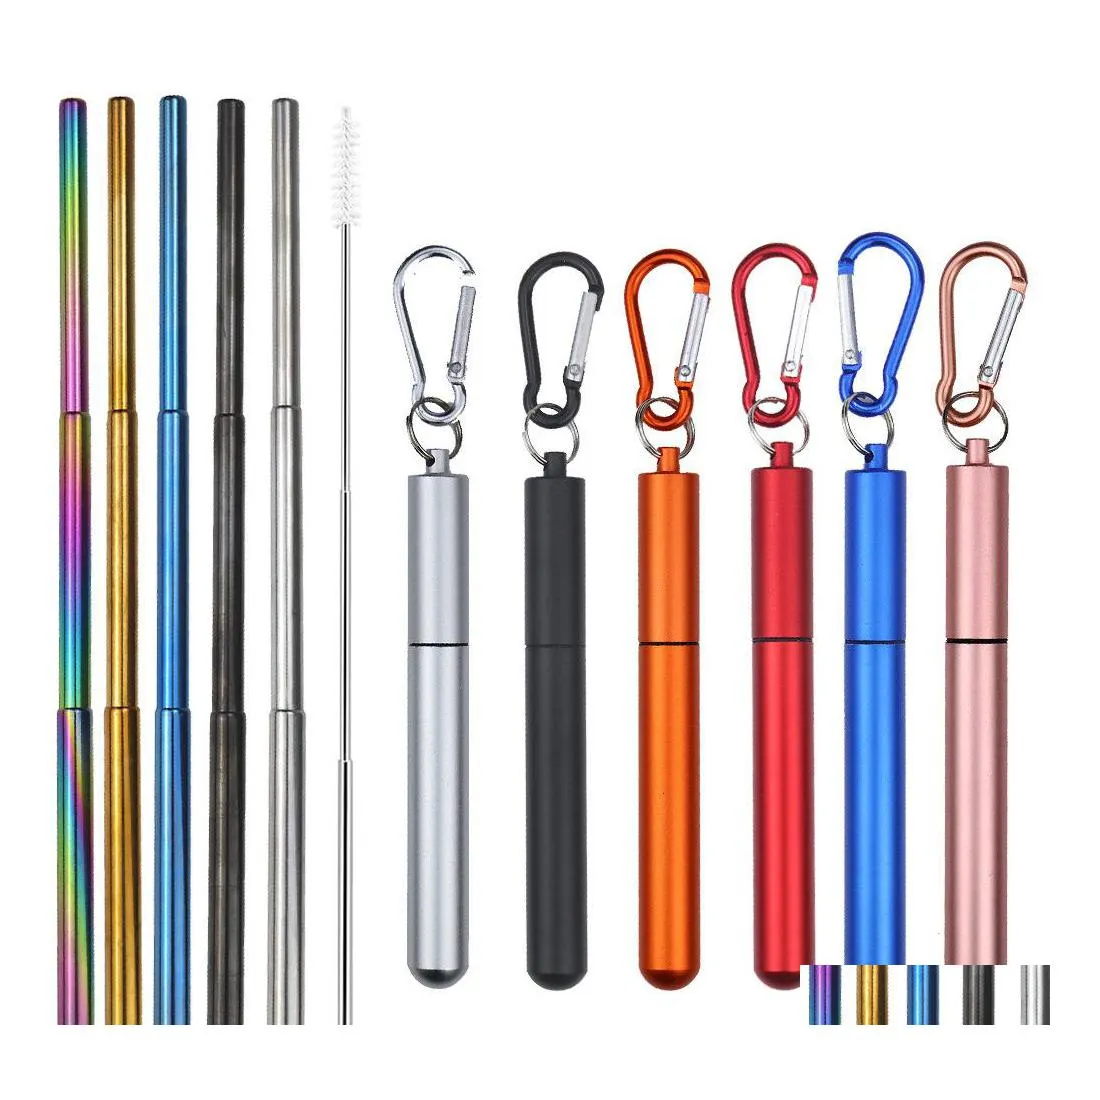 Drinking Straws Reusable Stainless Steel Sts Telescopic Drinking St With Aluminum Keychain Cleaning Brushes Inventory Wholesale Drop Dhaty